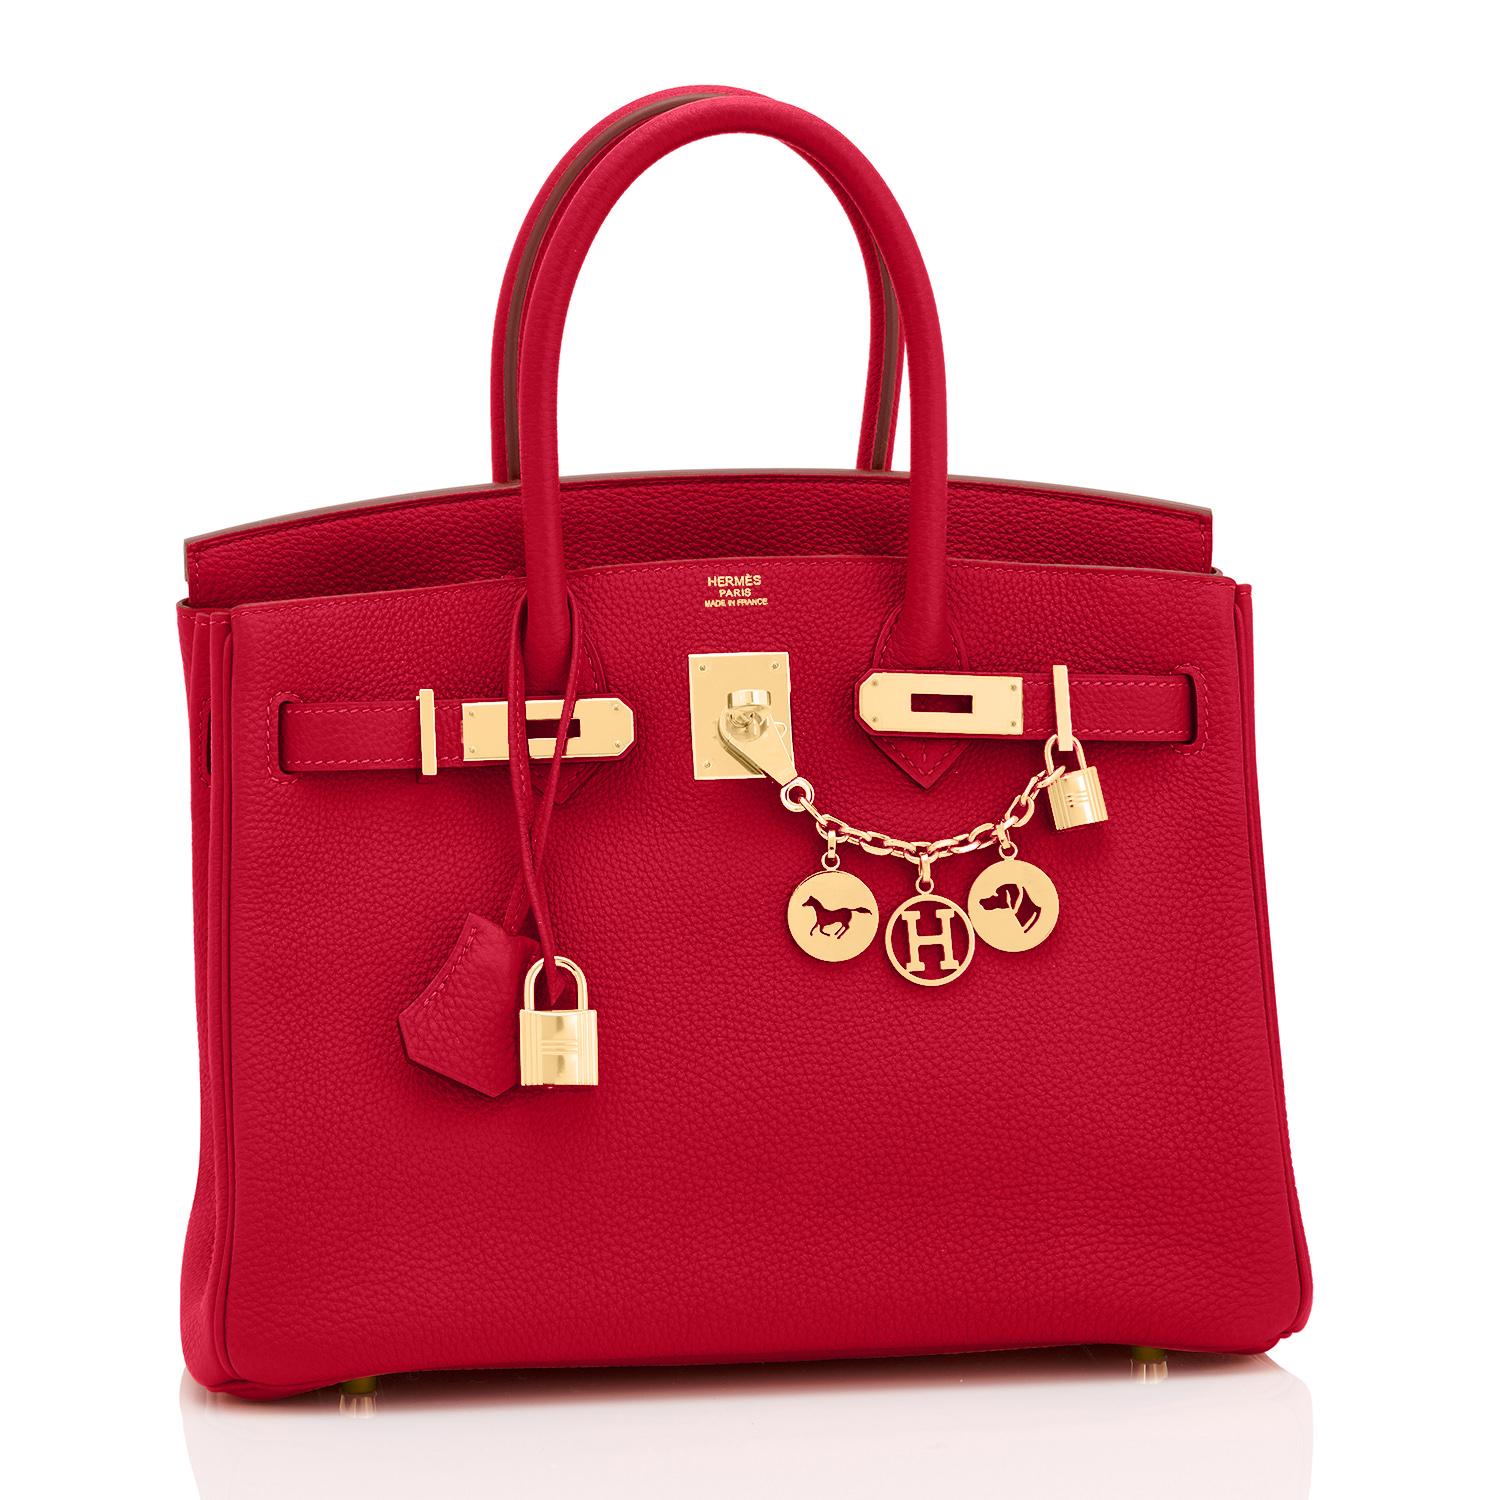 Hermes Rouge Vif Lipstick Red 30cm Birkin Gold Hardware Y Stamp, 2020
Just purchased from Hermes store! Bag bears new interior 2020 Y Stamp.
Brand New in Box.  Store Fresh.  Pristine Condition (with plastic on hardware).
Perfect gift! Coming with